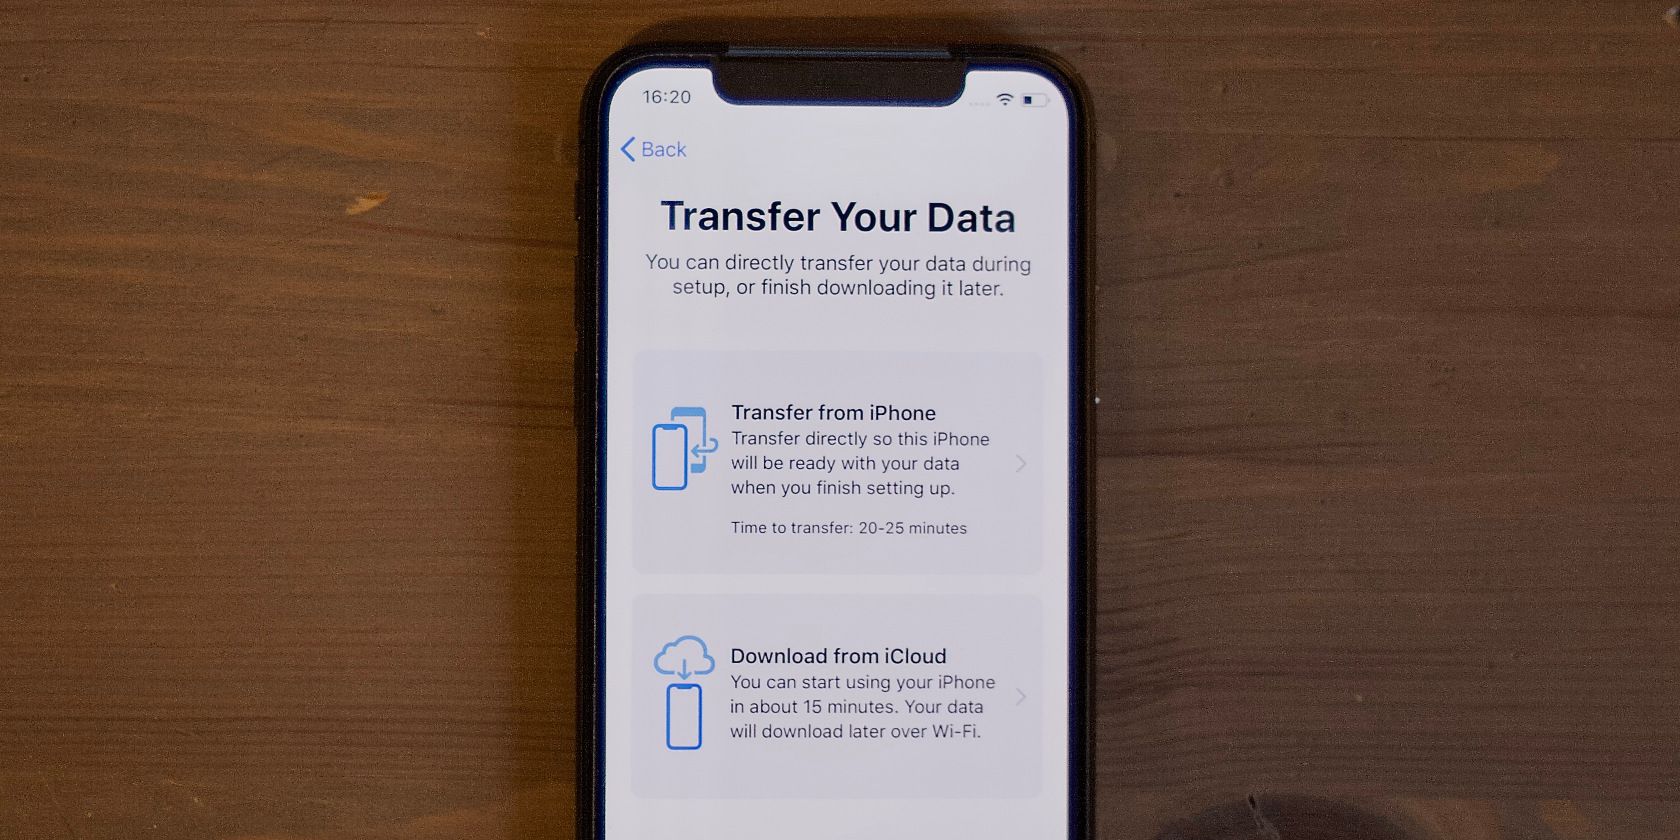 Transfer Your Data options on iPhone